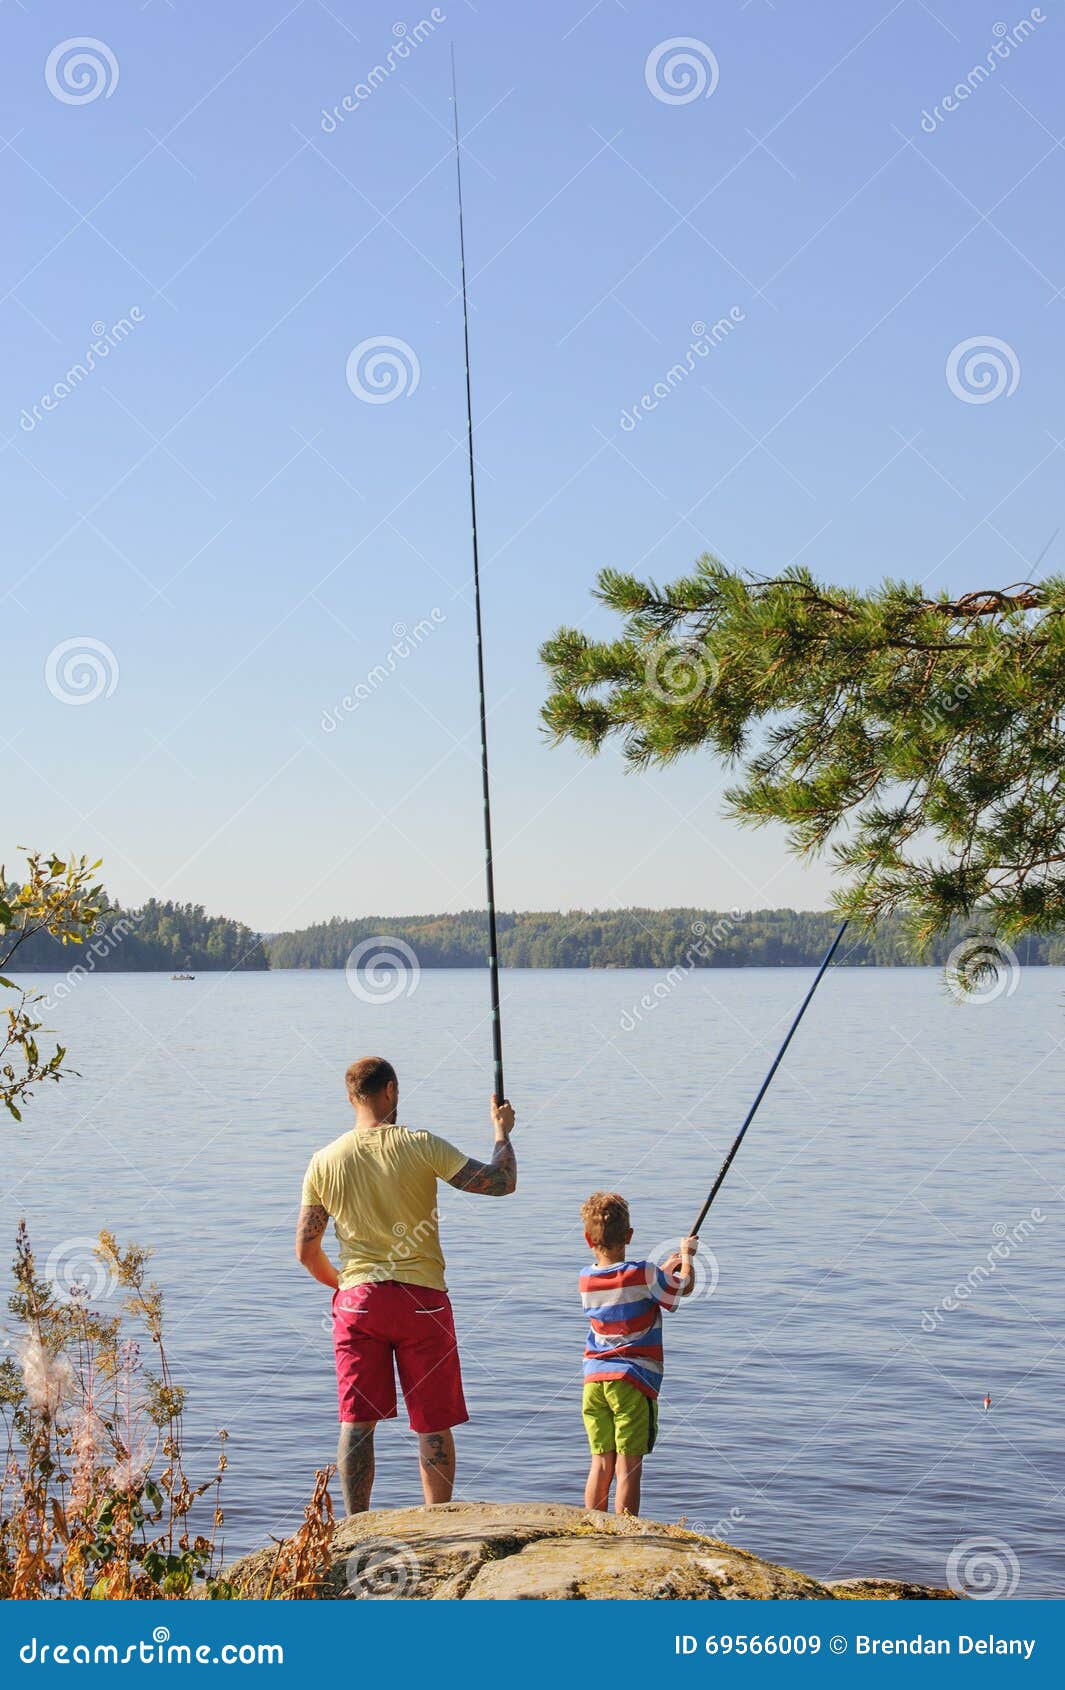 Fishing together stock image. Image of recreation, vacation - 69566009